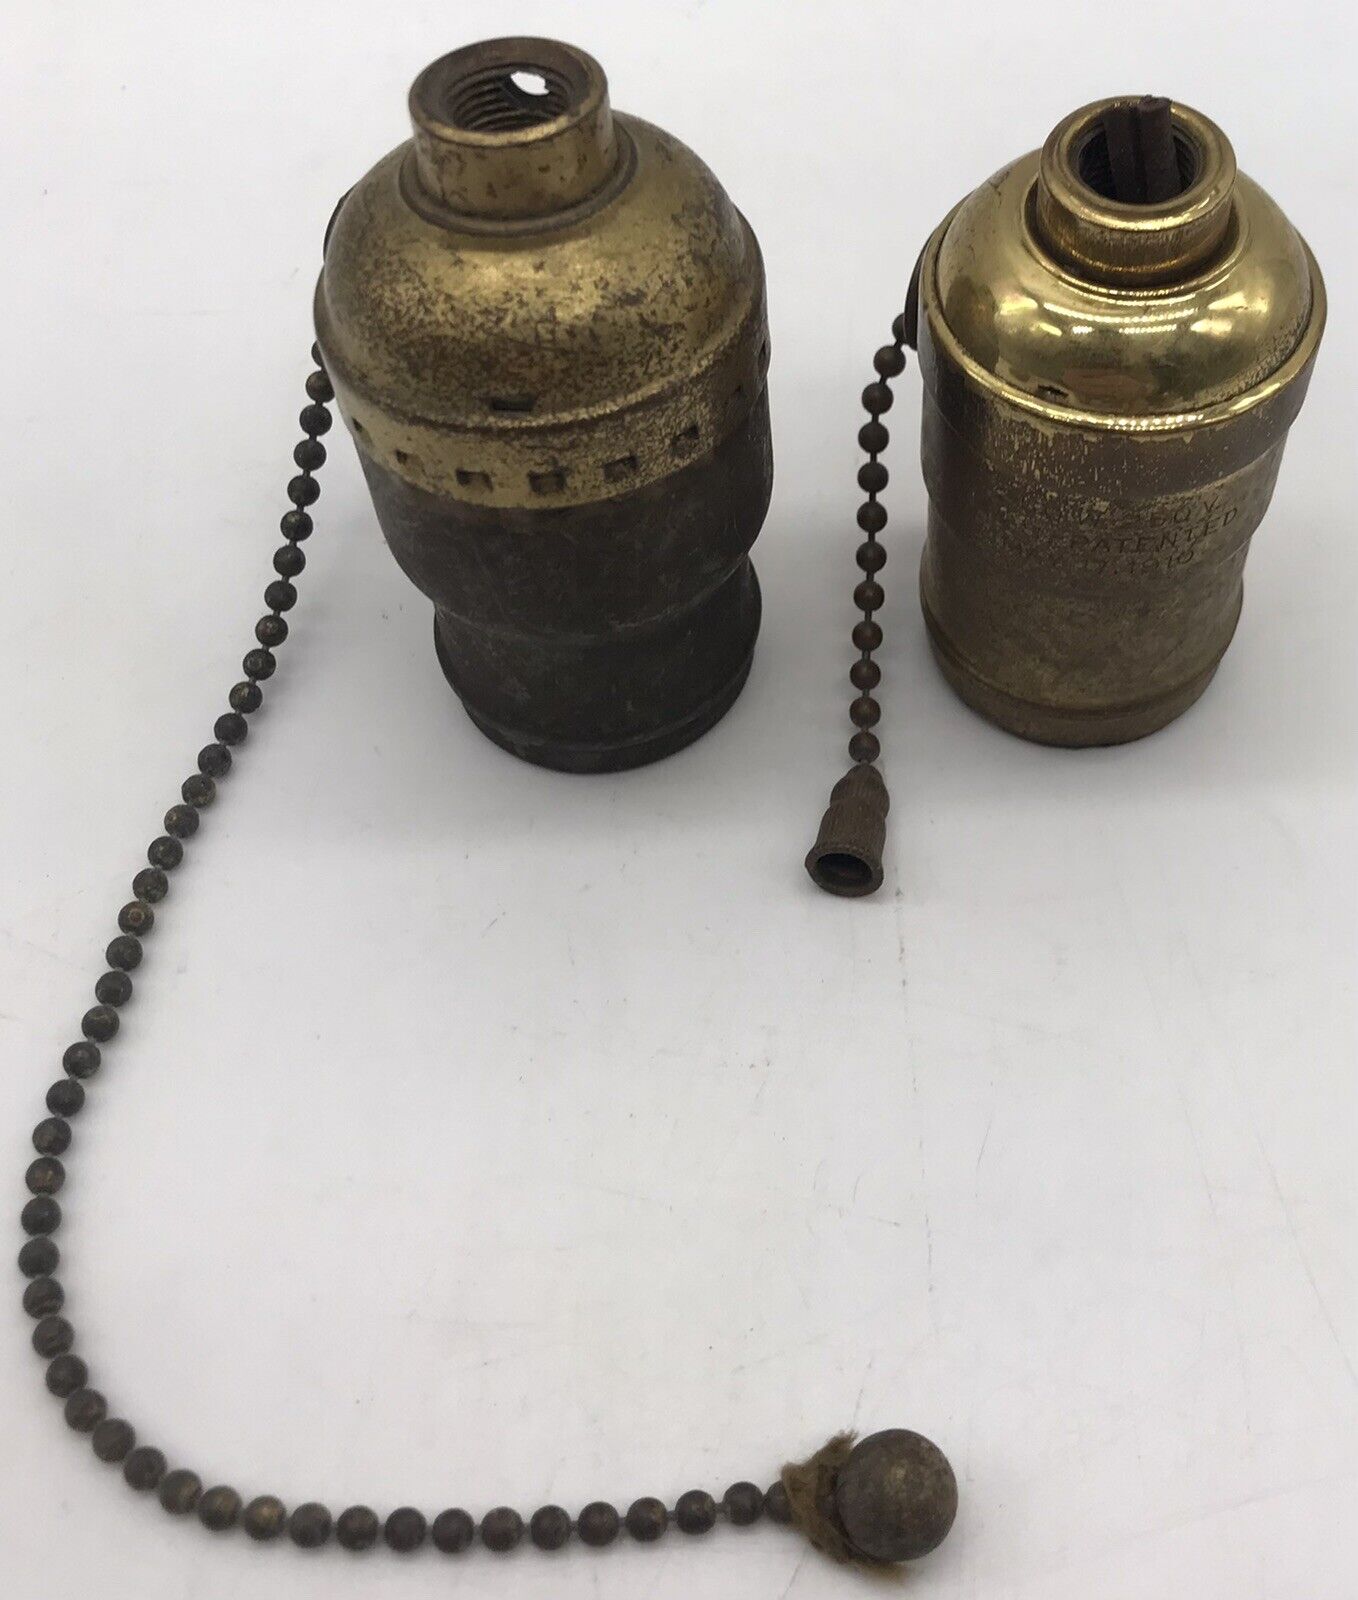 RARE TWO P & S PATENTED MAY 17 1910 BRASS LIGHT SOCKETS